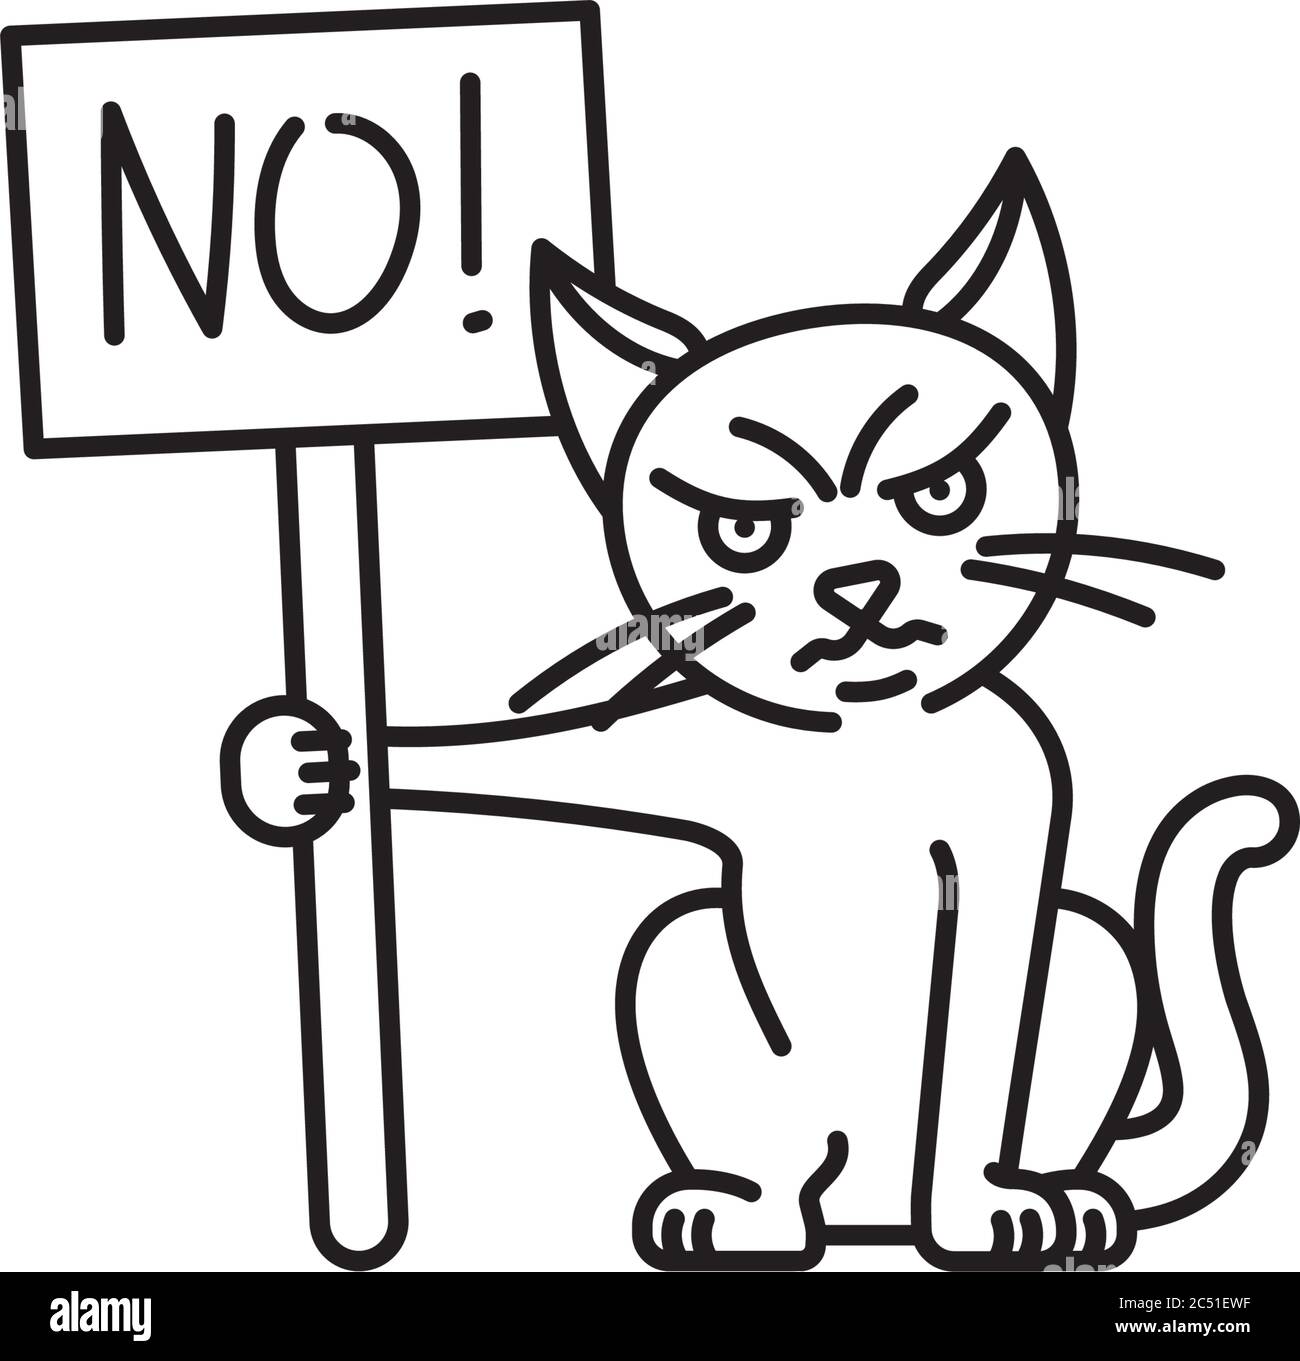 Cartoon cat character with protest sign line icon, Disobedience outline symbol. Stock Vector